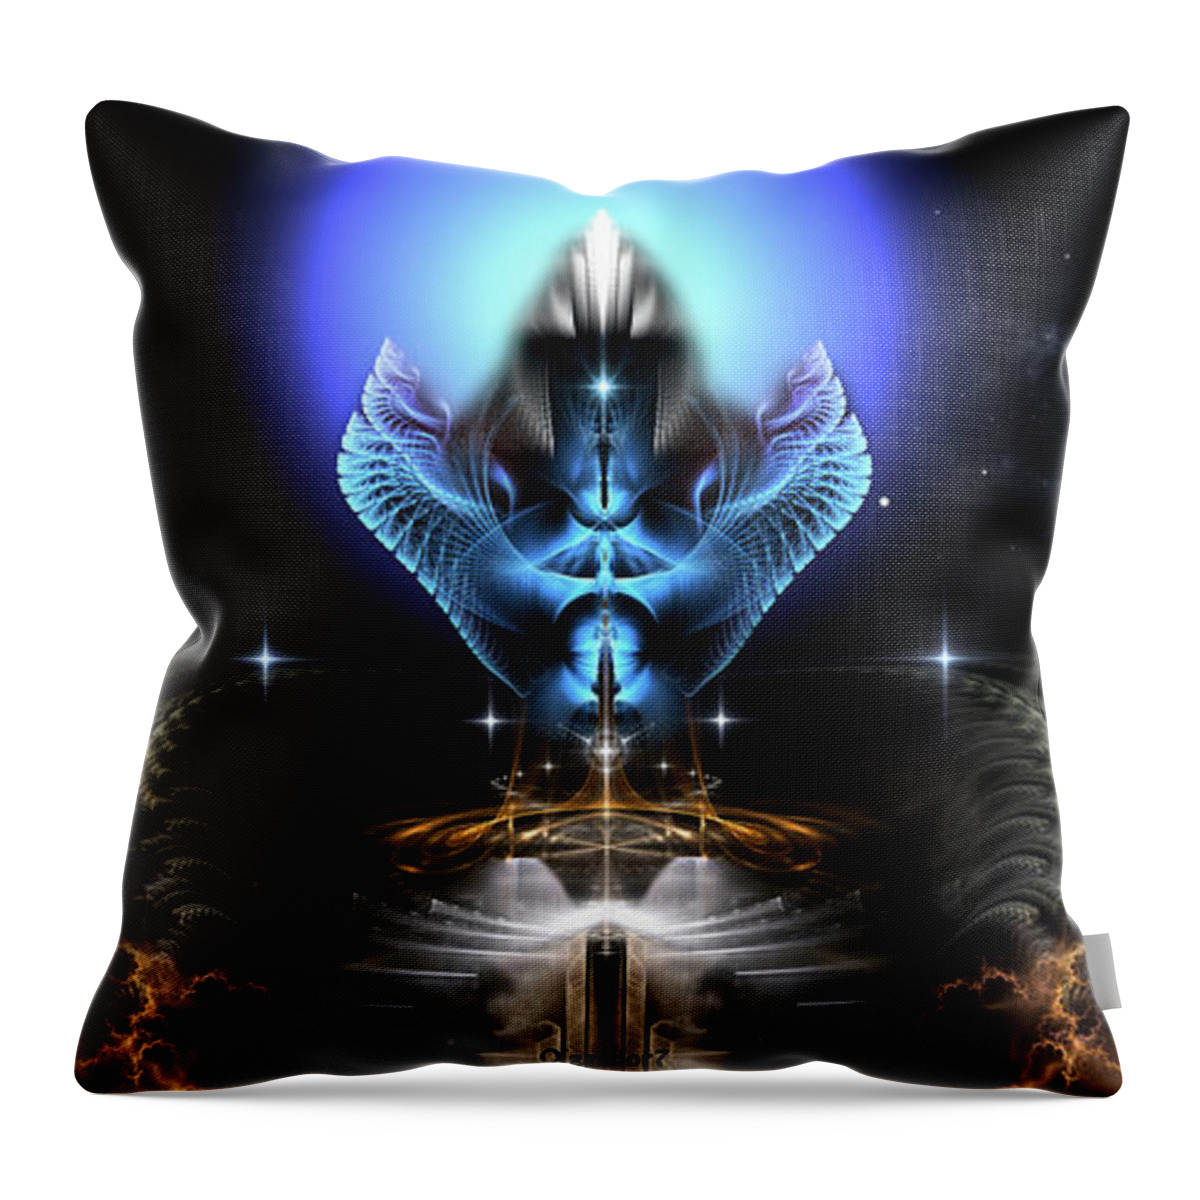 The Universal Dream Temple Of Kidora Iii Throw Pillow featuring the digital art The Universal Dream Temple Of Kidora III by Rolando Burbon